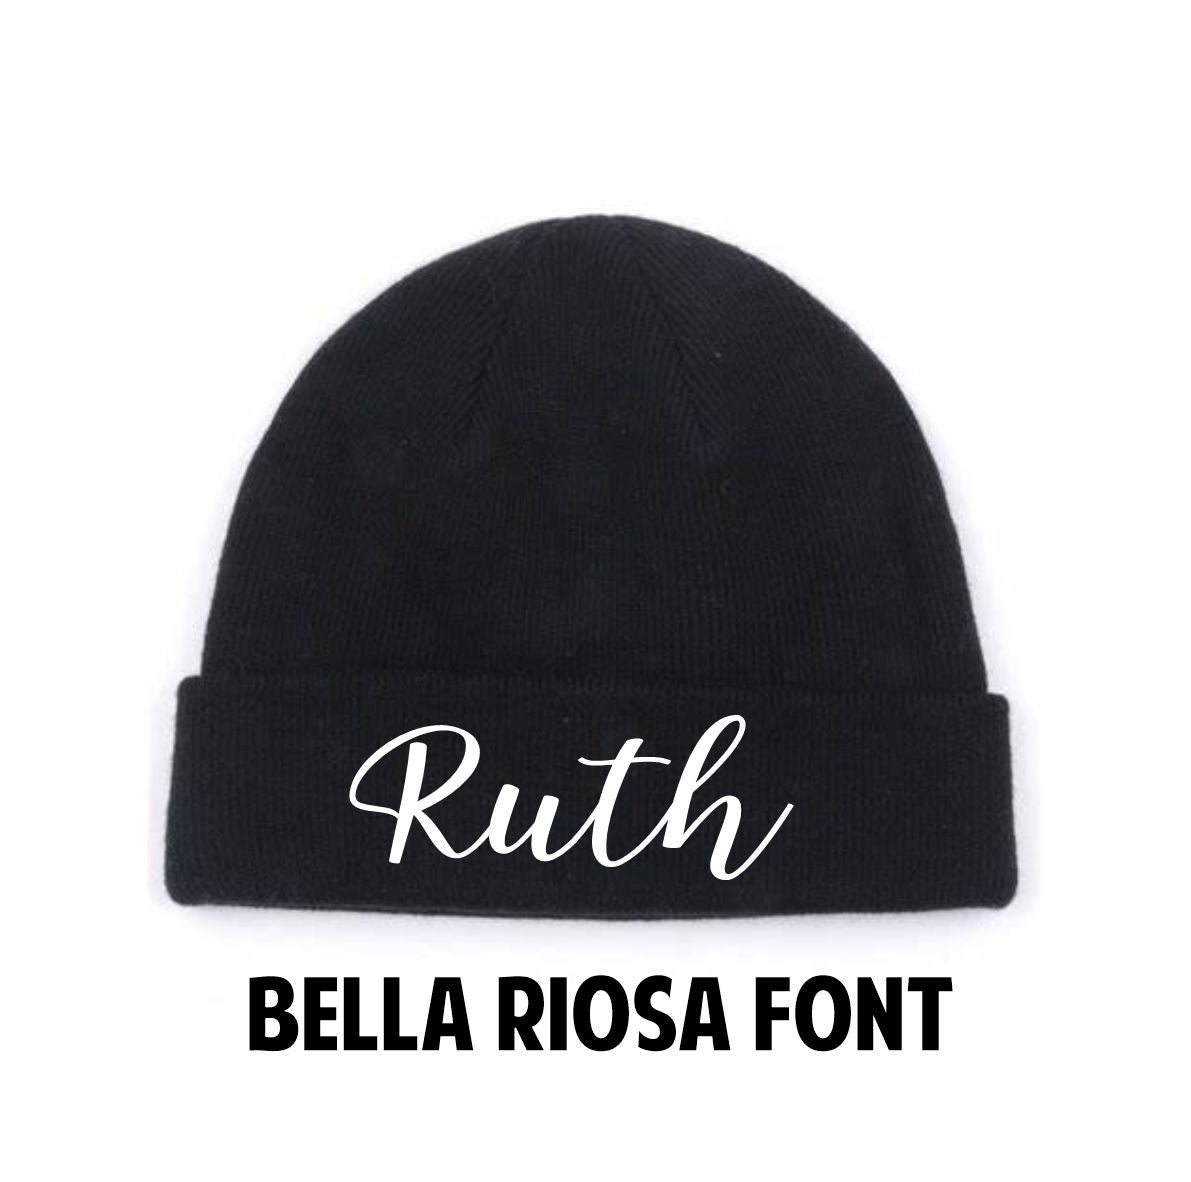 Customized Bonnet with Baby Name